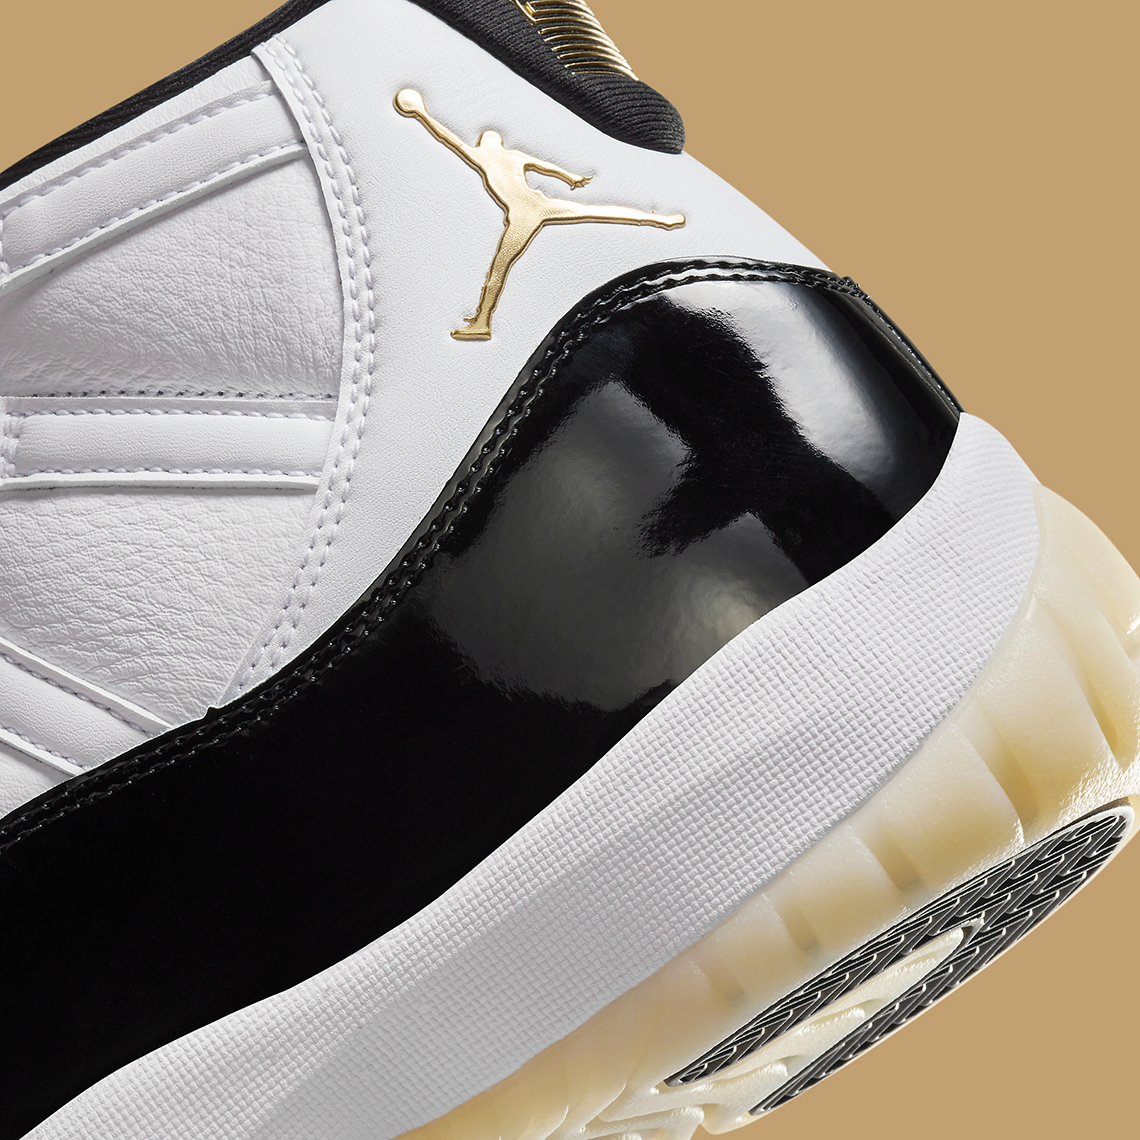 Michael Jordans Iconic Free Throw Line Dunk Is Cemented With An Gratitude Dmp Ct8012 170 Release Date 8